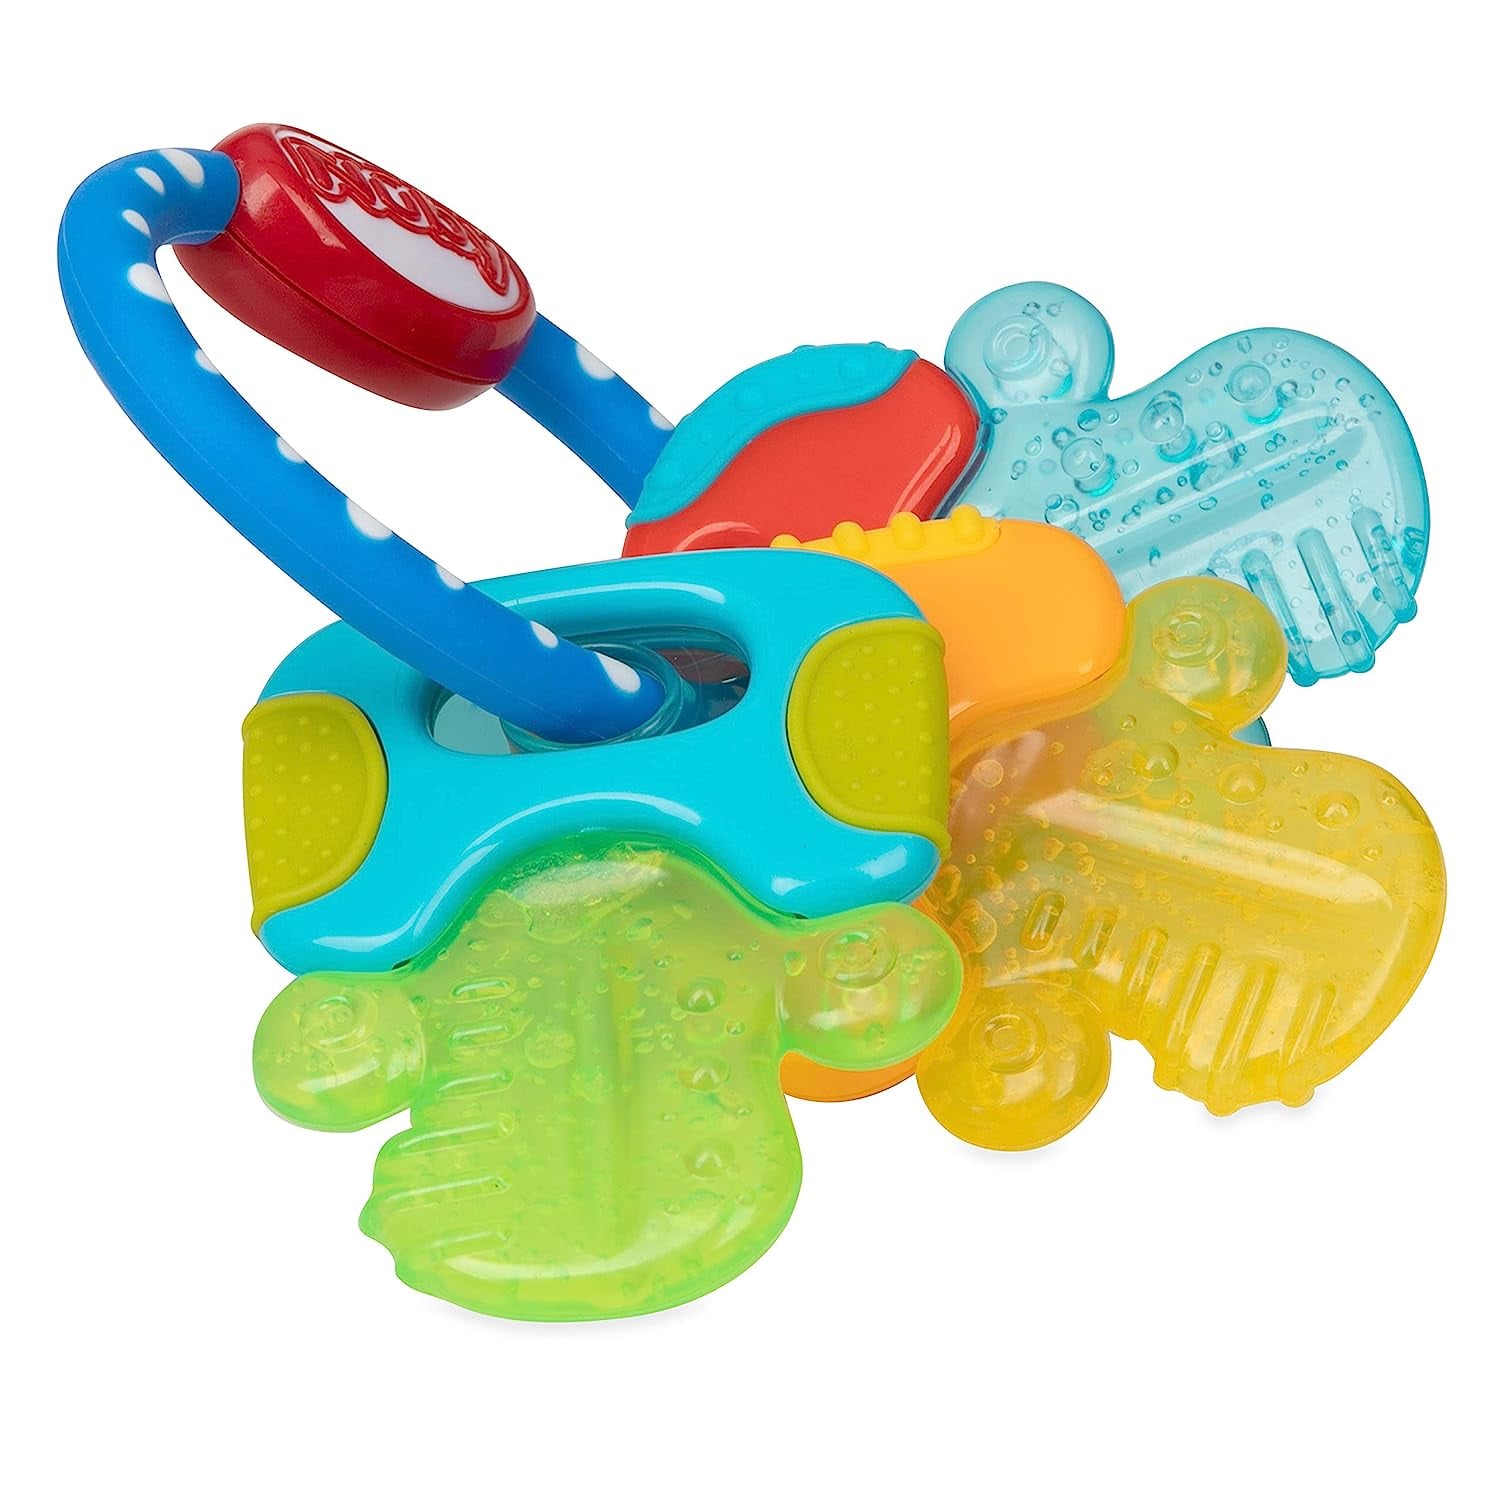 10 Best Teething Toys for Babies